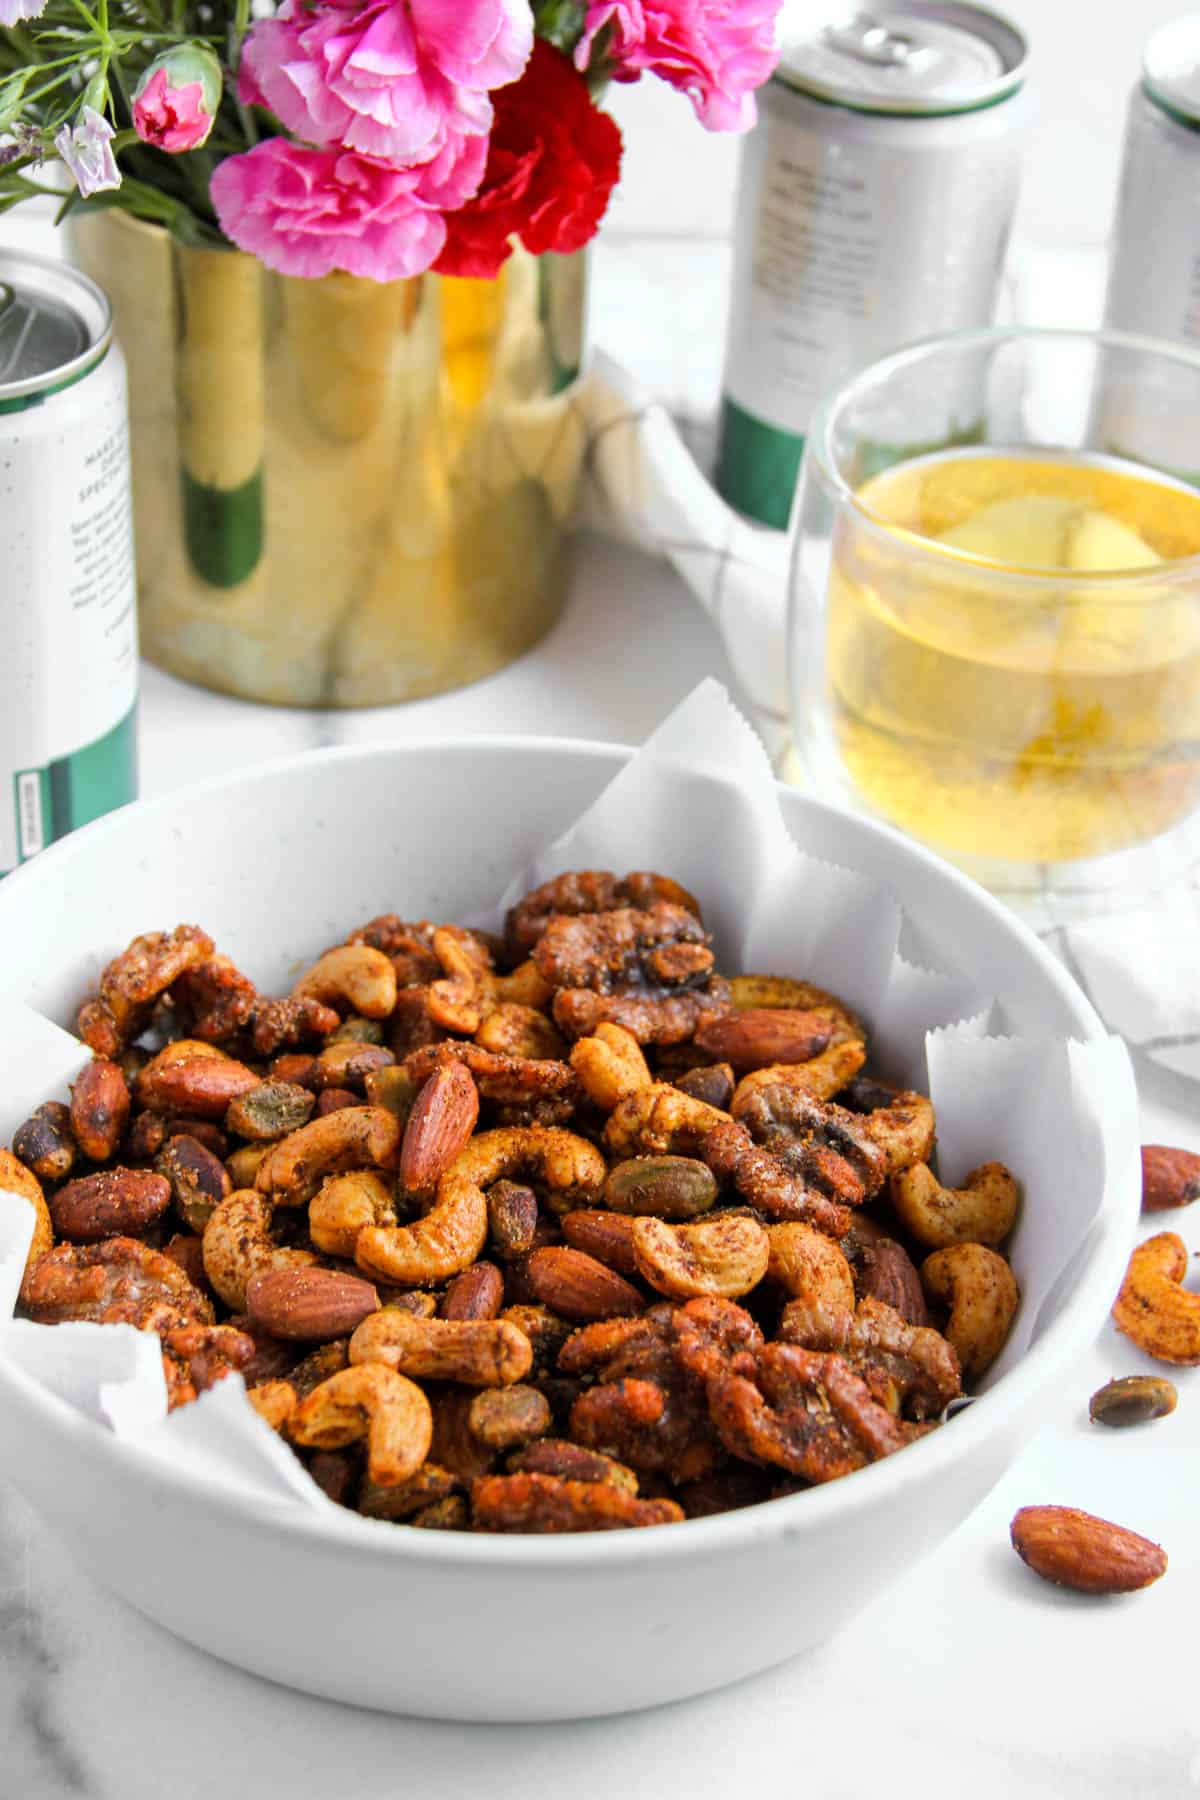 masala nuts served with drinks 